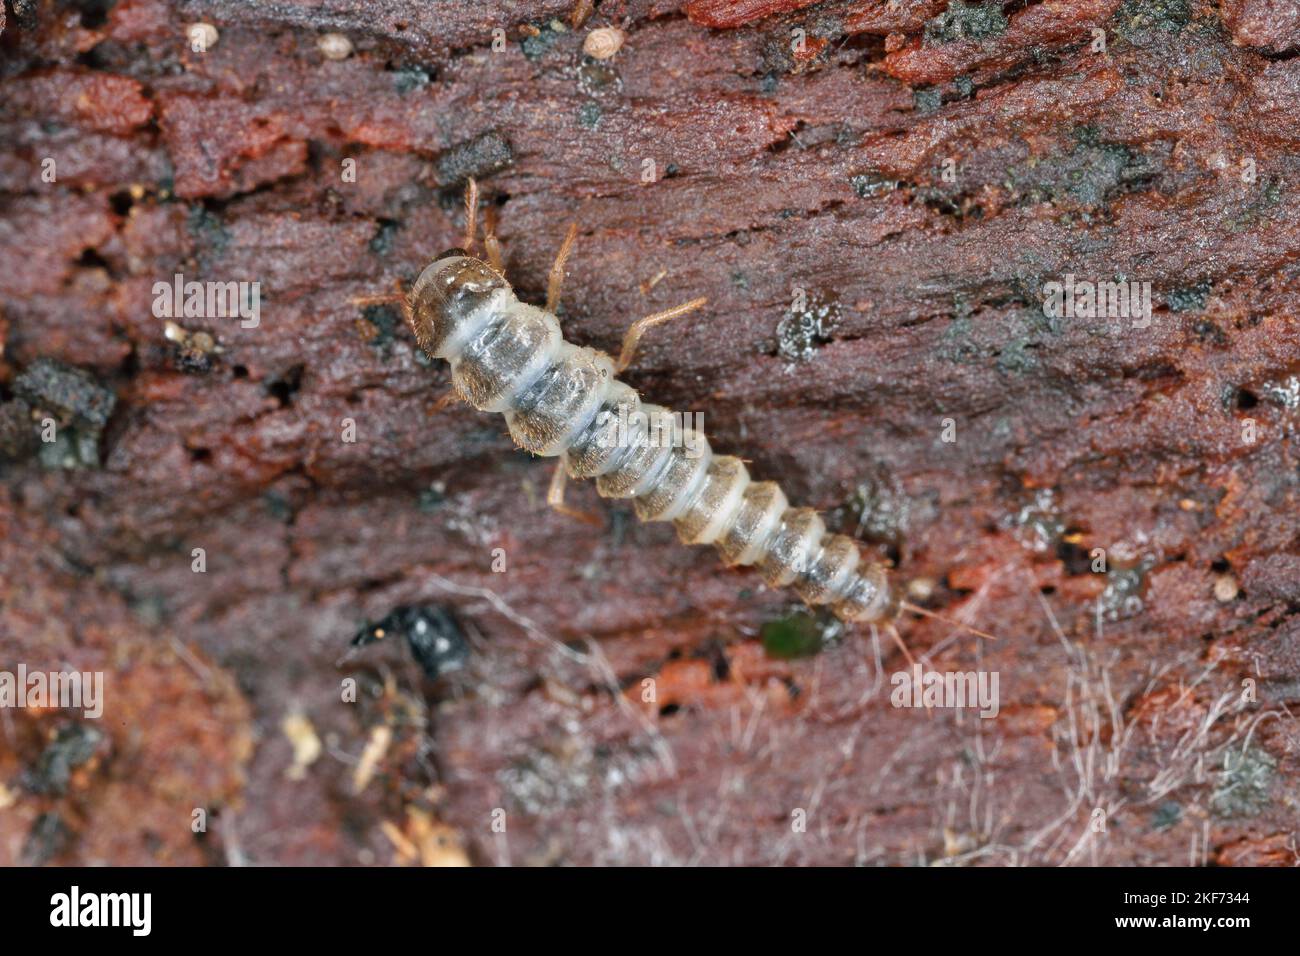 The larva of a beetle of the family Staphylinidae, rove beetles under the bark of a tree. Stock Photo